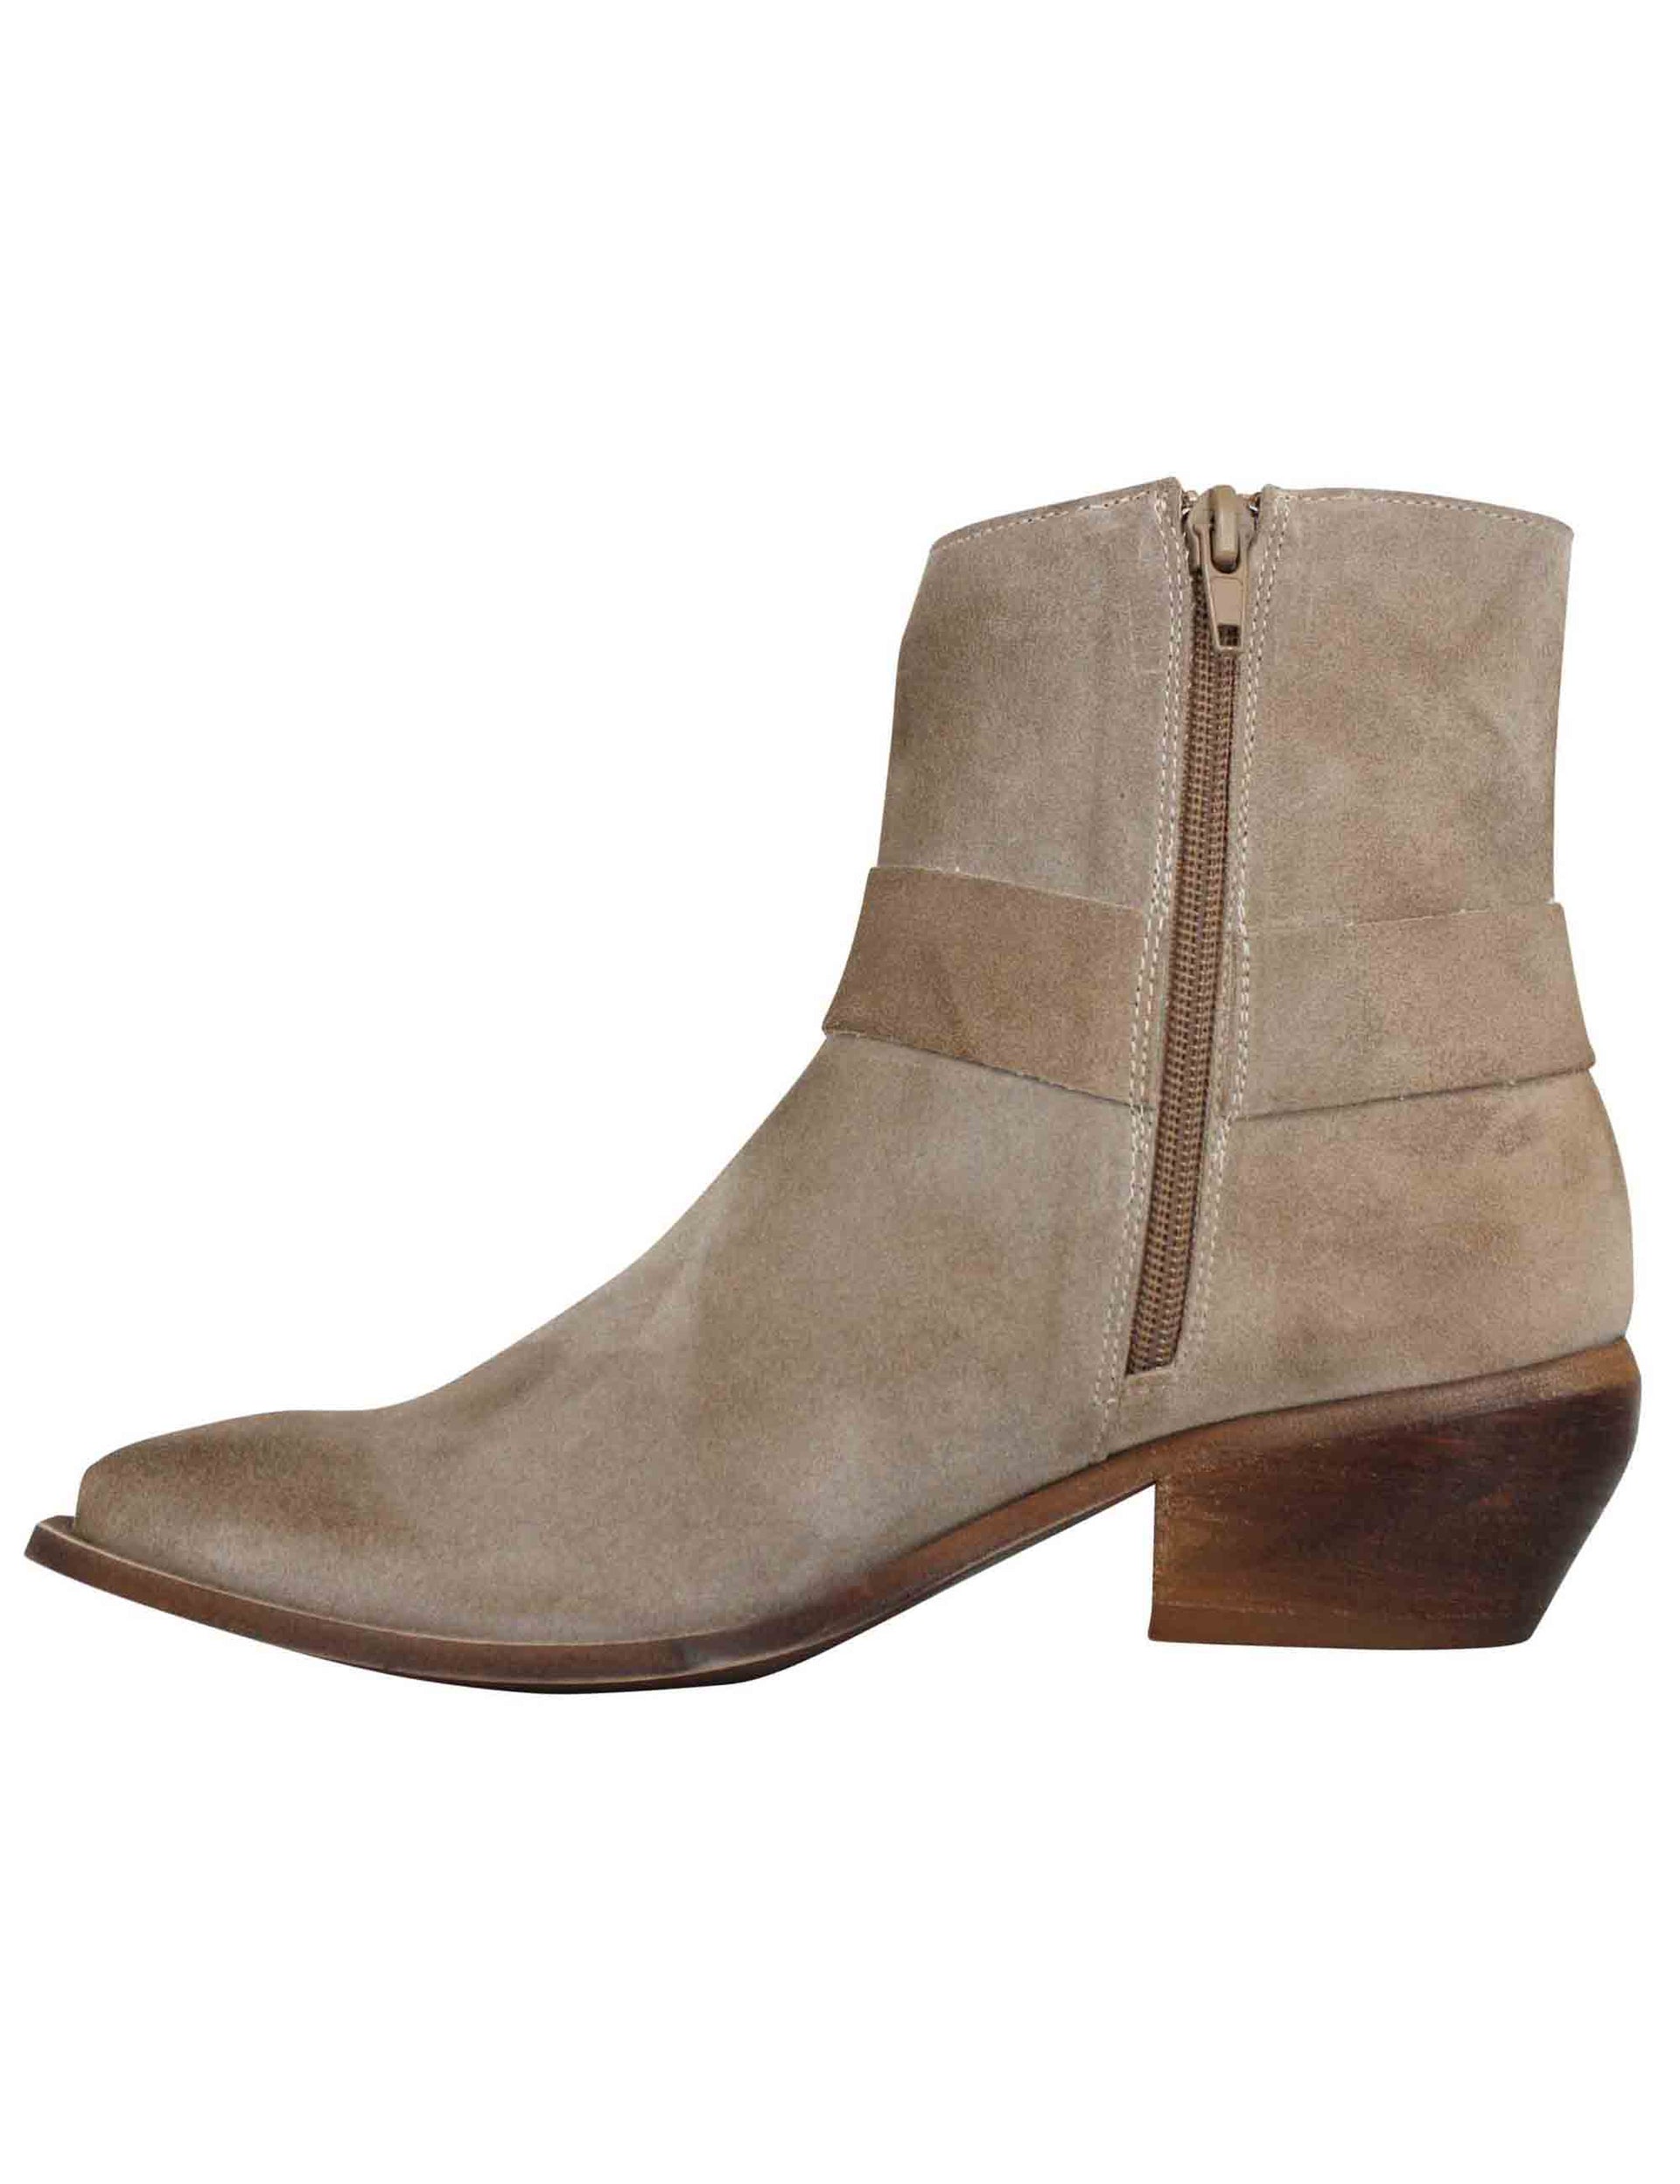 Women's Texan boots in vintage beige suede with side accessory